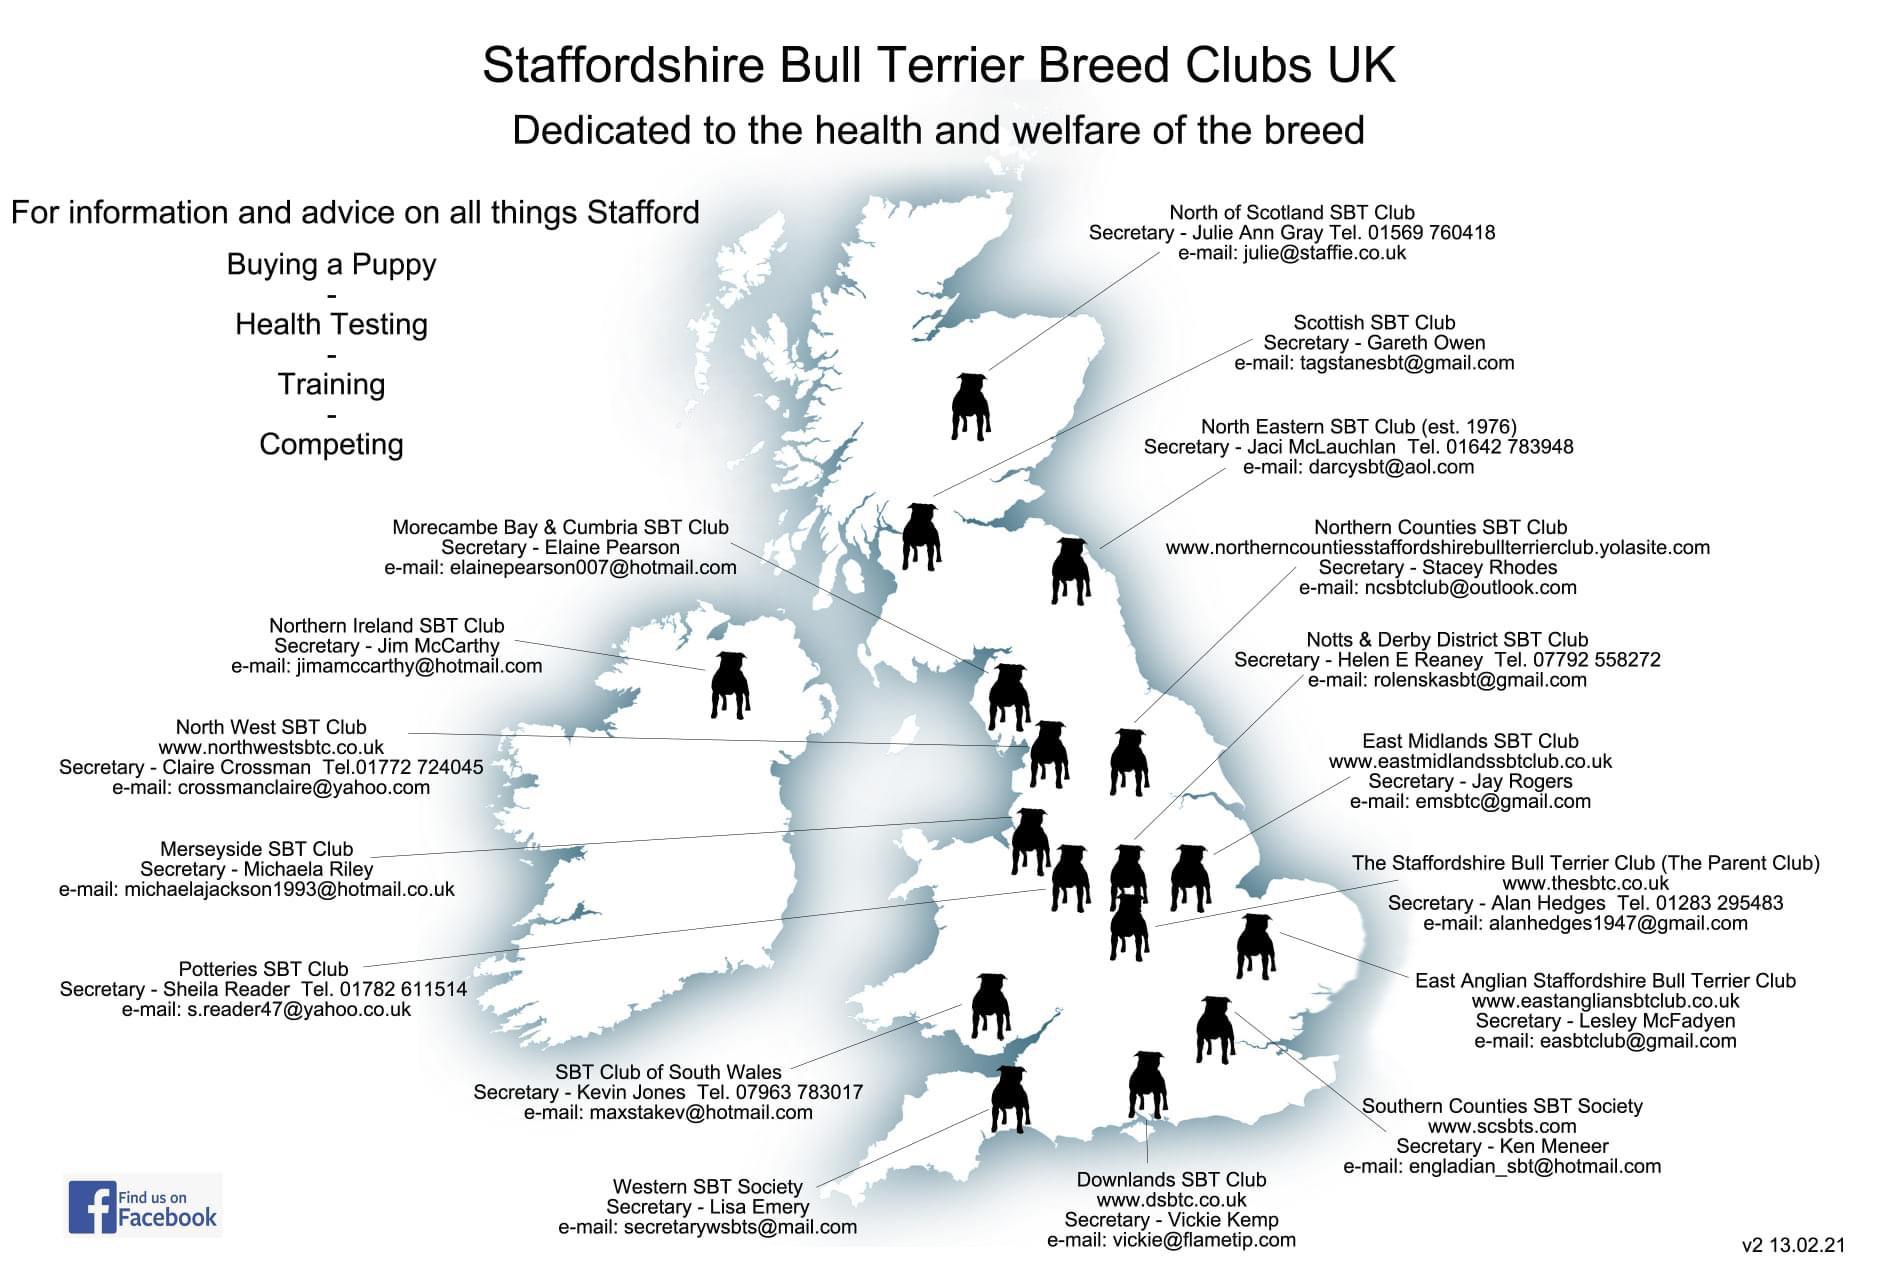 staffordshire bull terrier breed club information on UK map